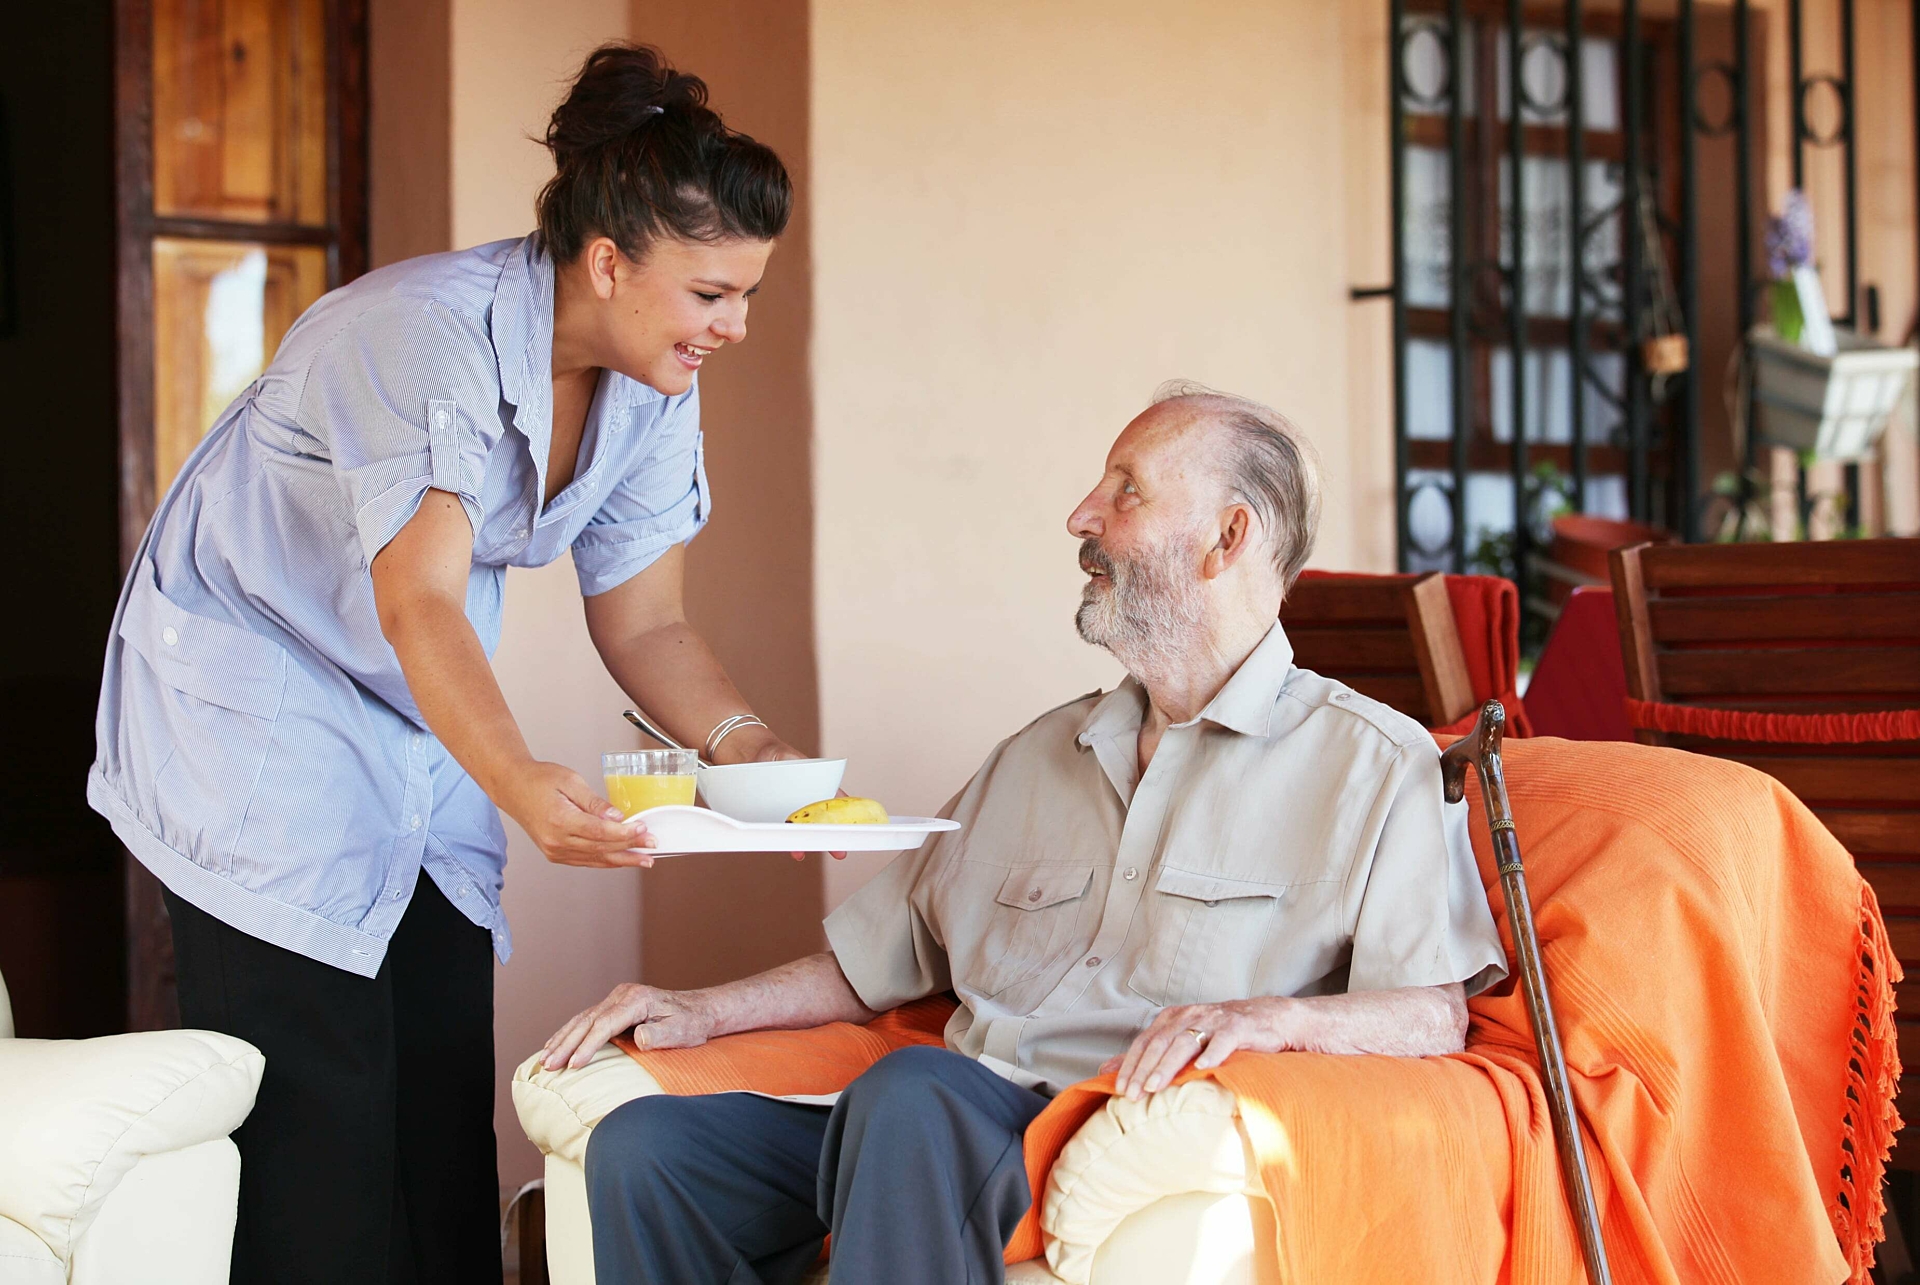 At home care recipients spending double the time in hospital compared to aged care residents